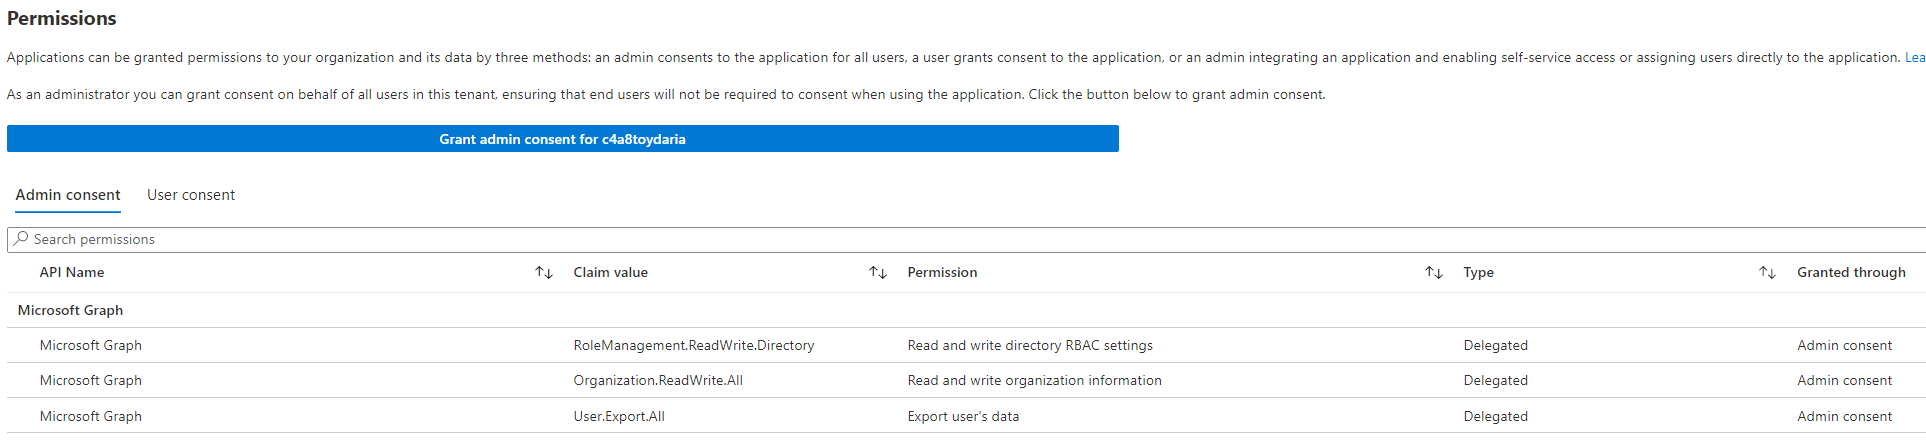 Enterprise App with granted permissions